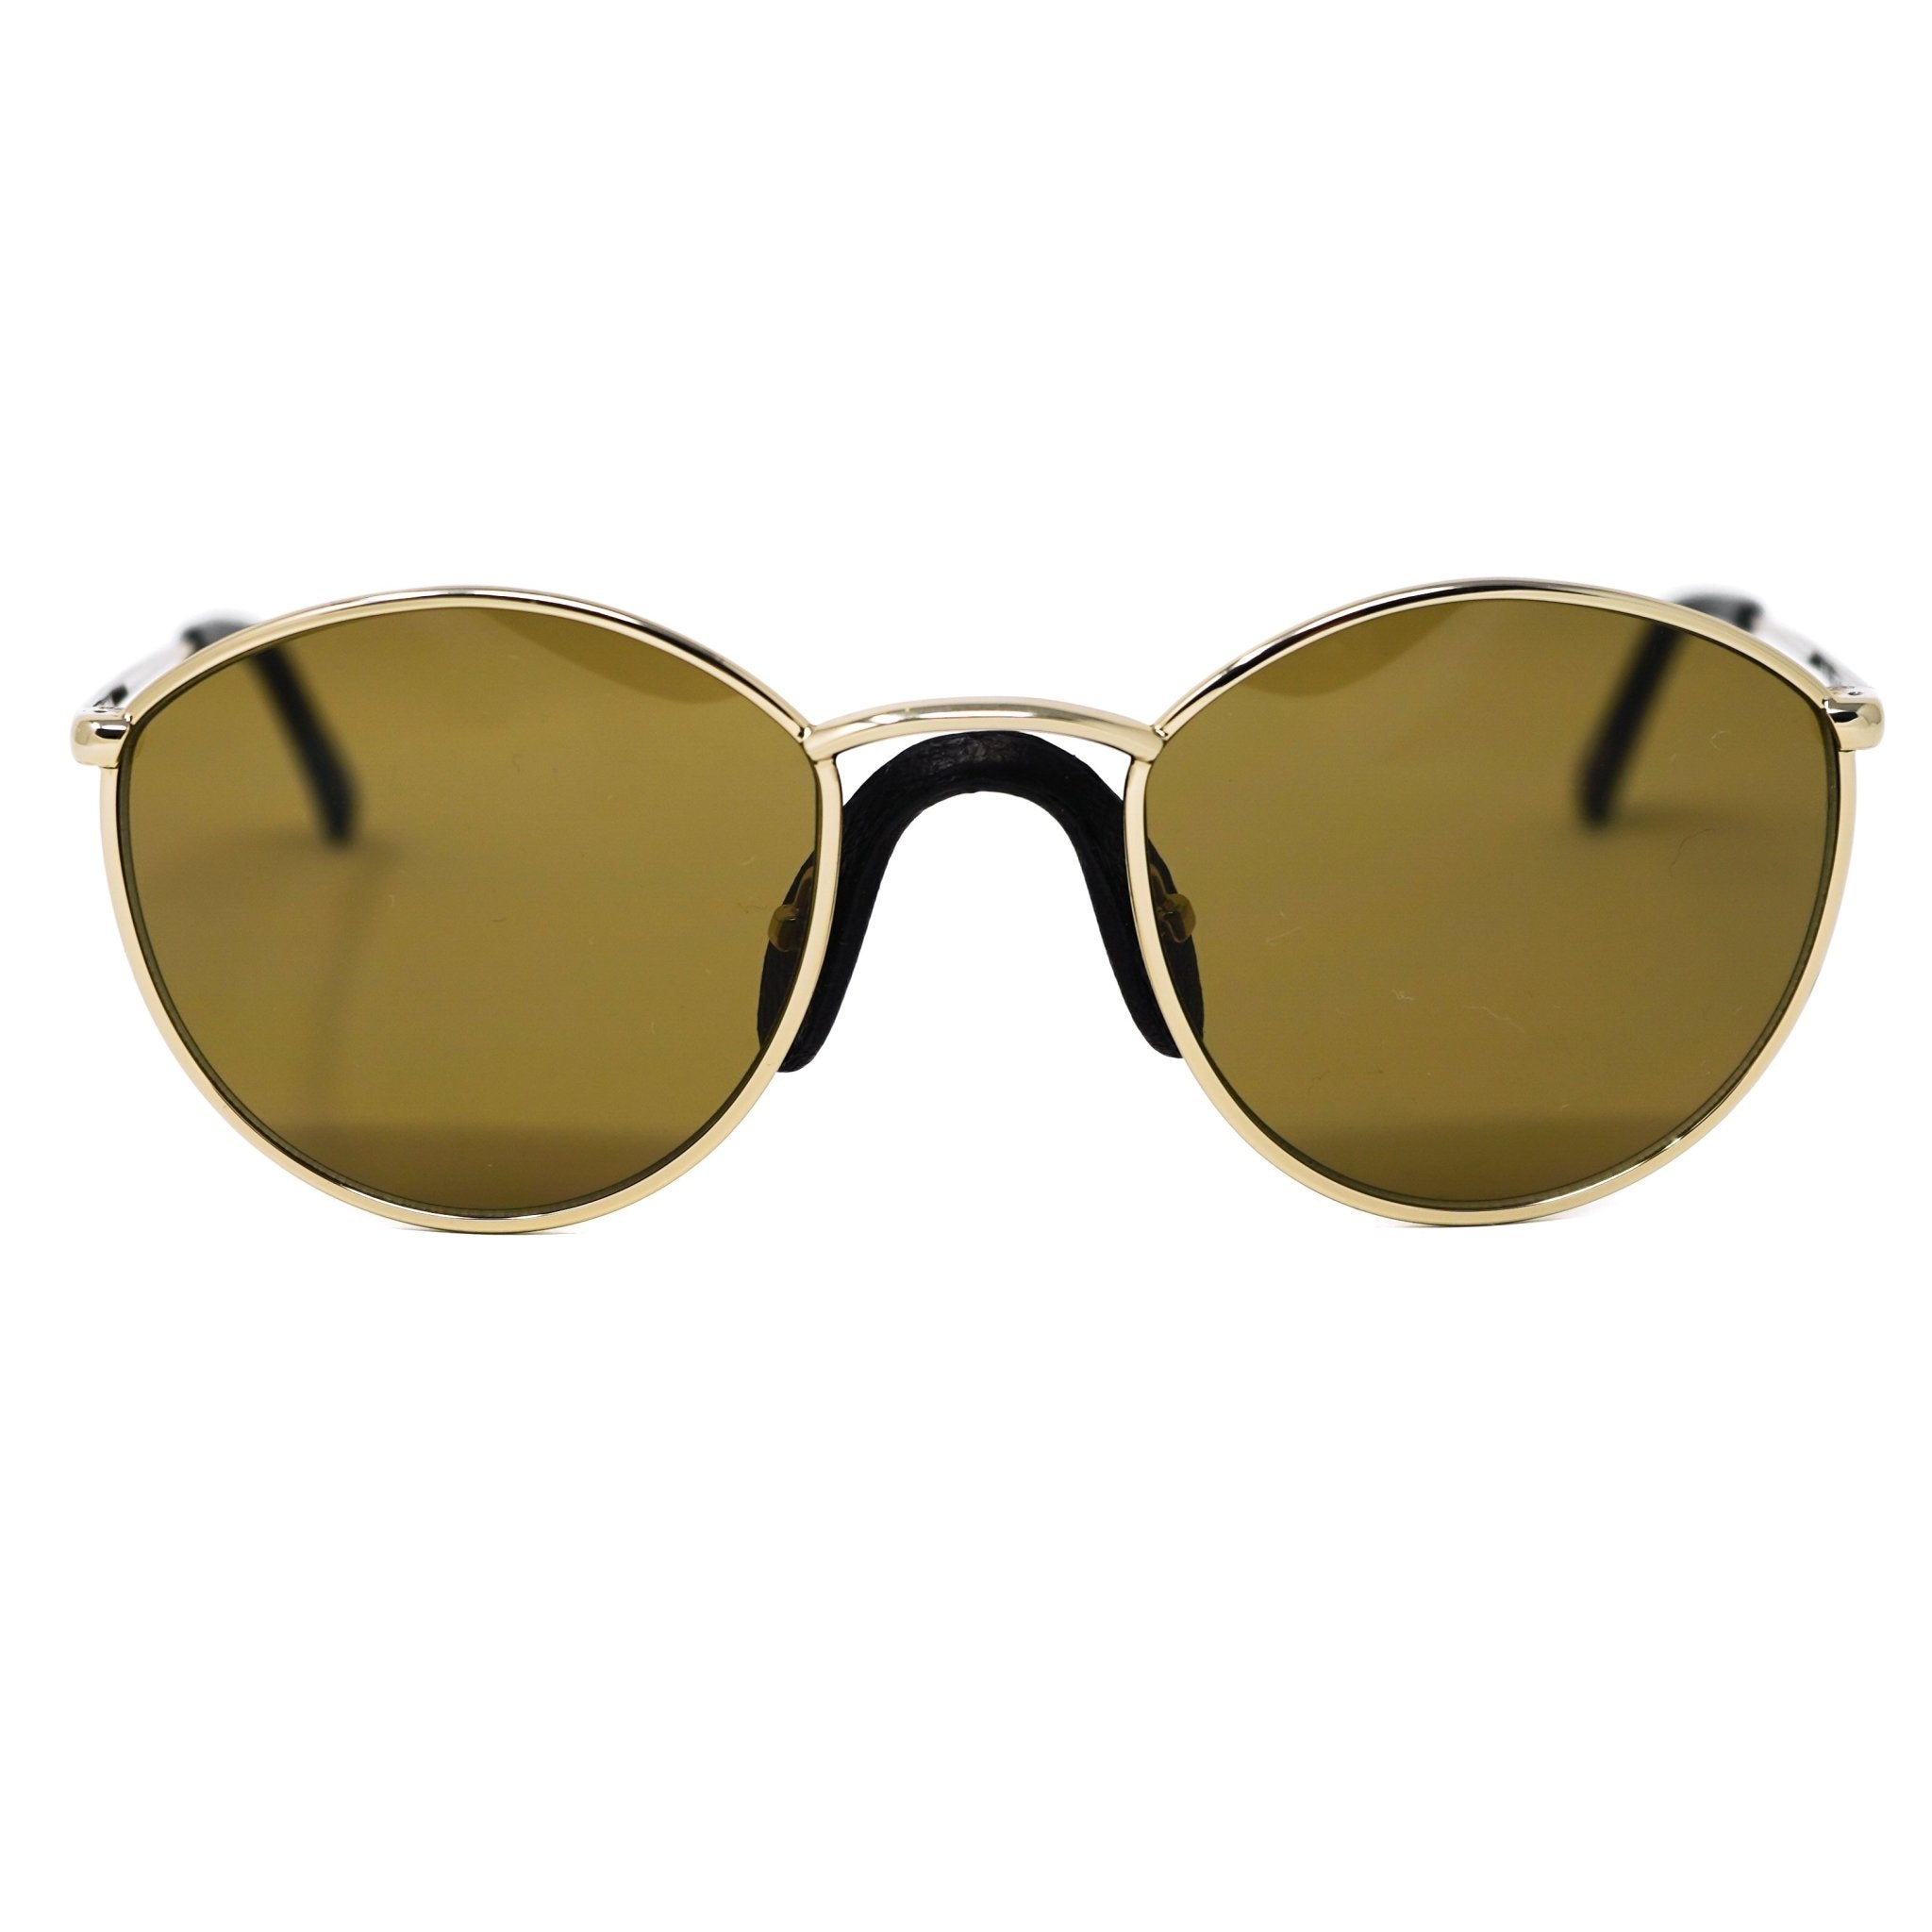 Damir Doma Sunglasses Round Light Gold Black Leather with Brown Lenses DD2C1SUN - Watches & Crystals